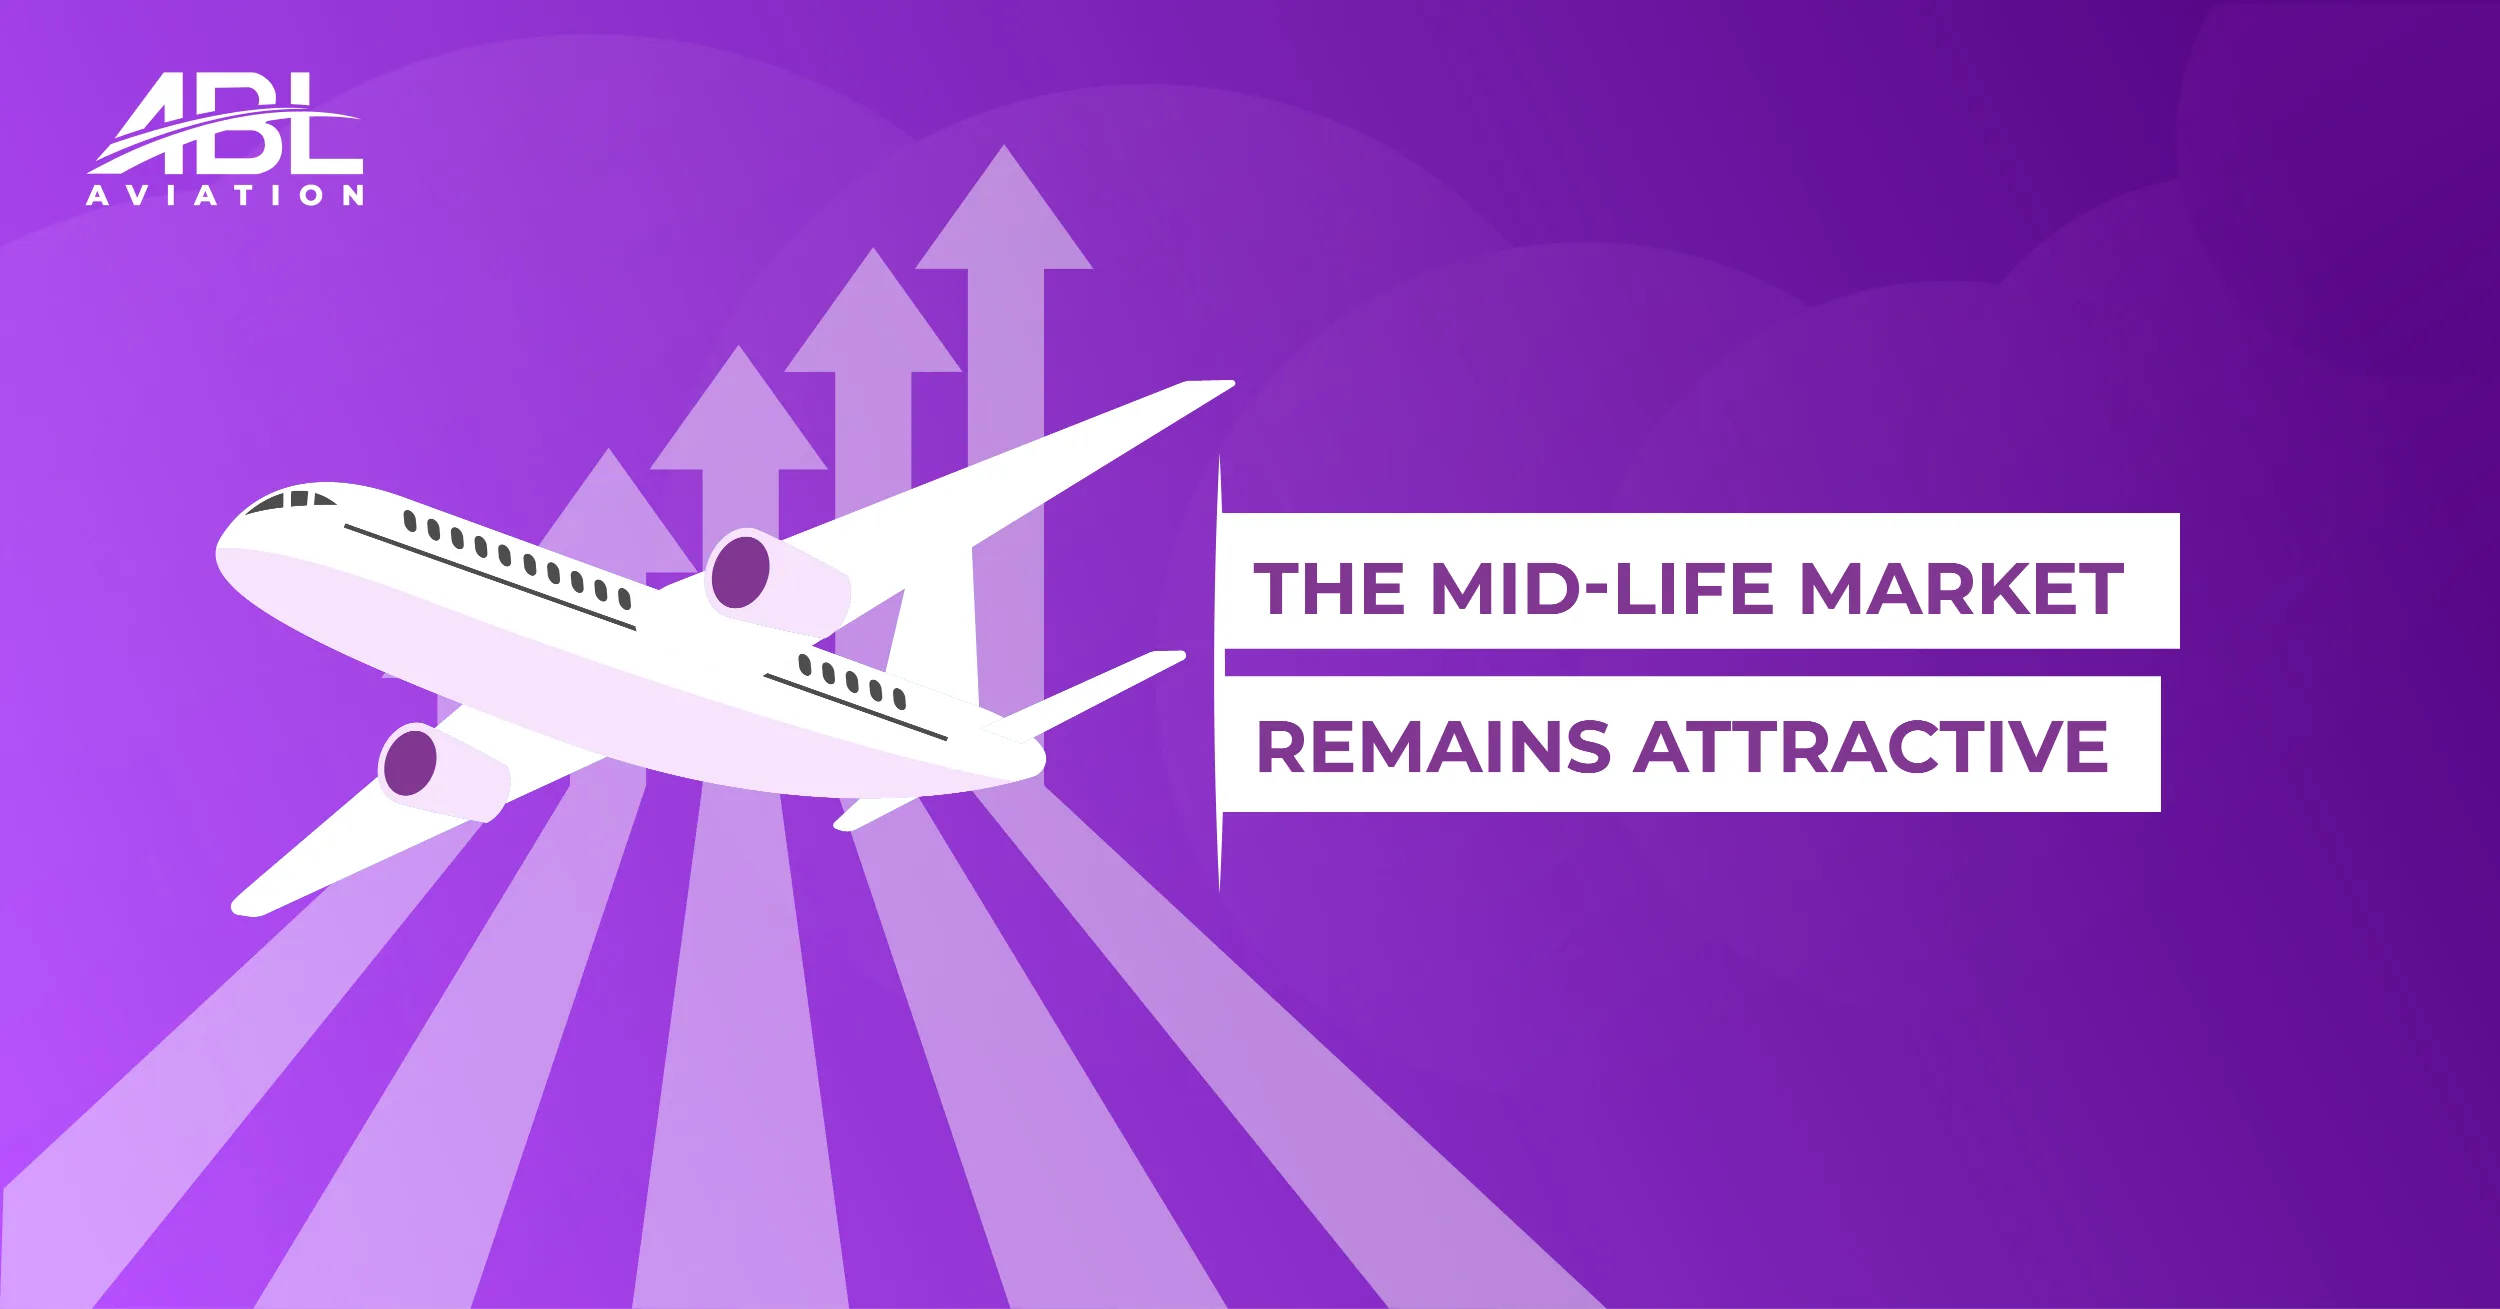 ABL Aviation Releases the April 2021 Insights Report – “The Mid-Life Market Remains Attractive”